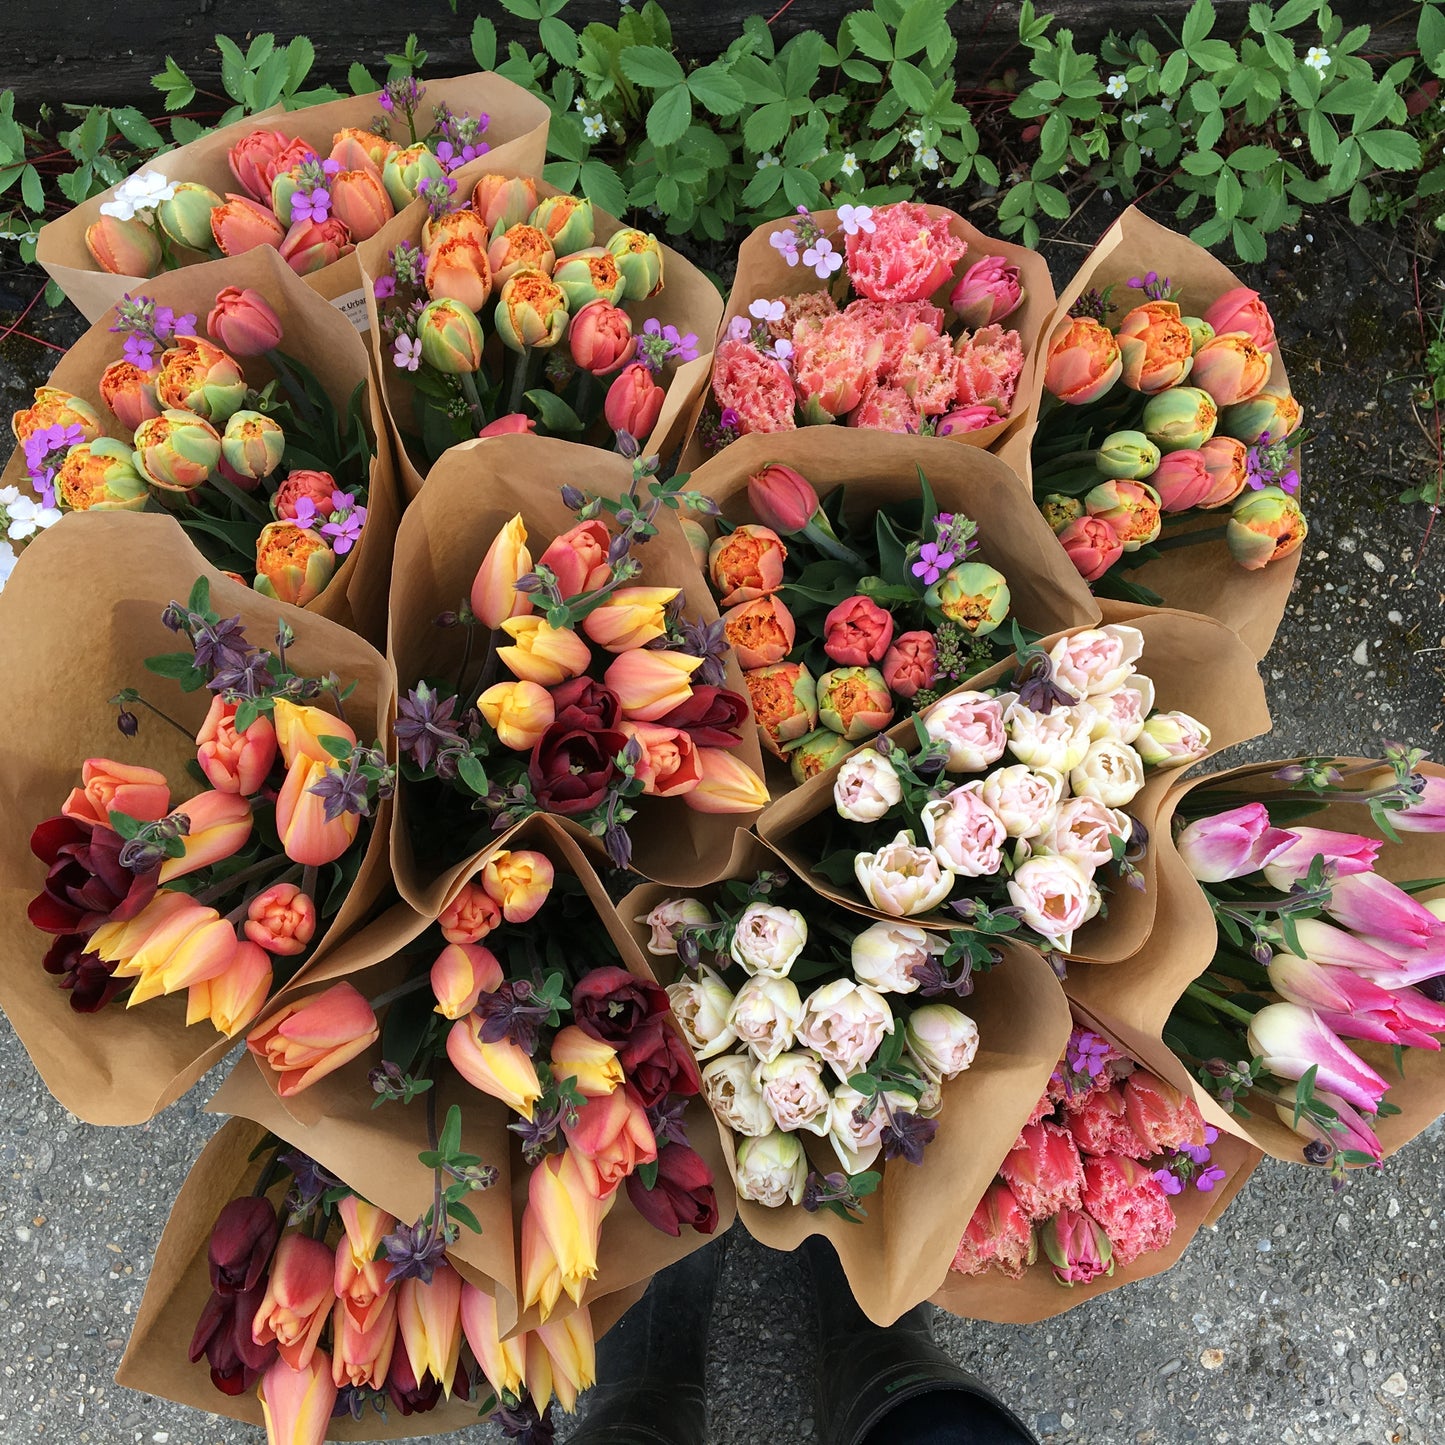 1. Spring Flower Subscription,        May 16 - June 6  SOLD OUT